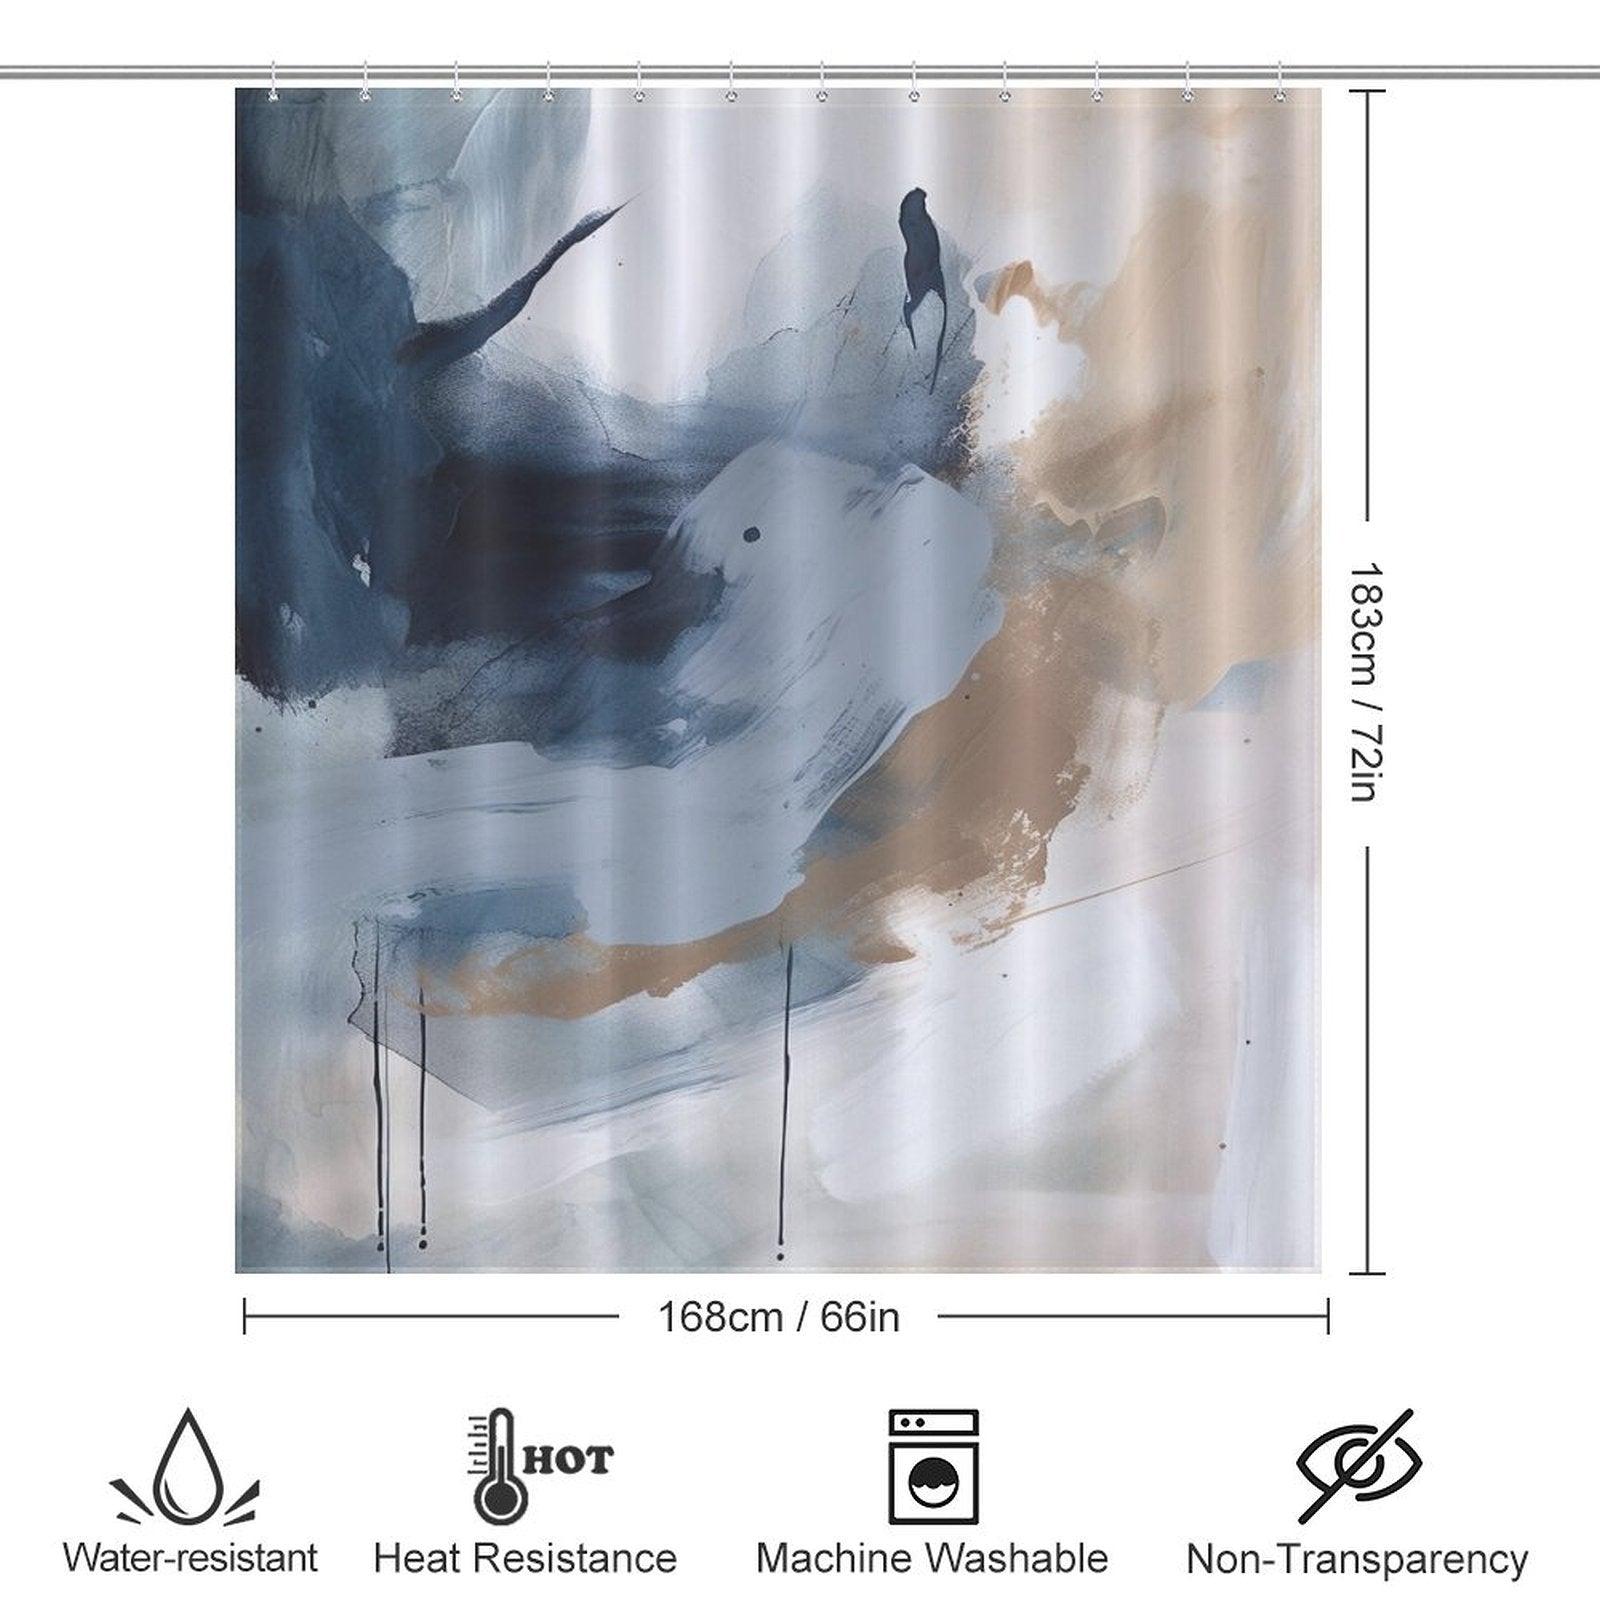 Modern Wall Art Oil Painting Navy Blue Abstract Shower Curtain-Cottoncat with dimensions 183 cm x 168 cm (72 in x 66 in). The illustration includes icons for water resistance, heat resistance, machine washable, and non-transparency. This piece doubles as modern wall art for your bathroom by Cotton Cat.